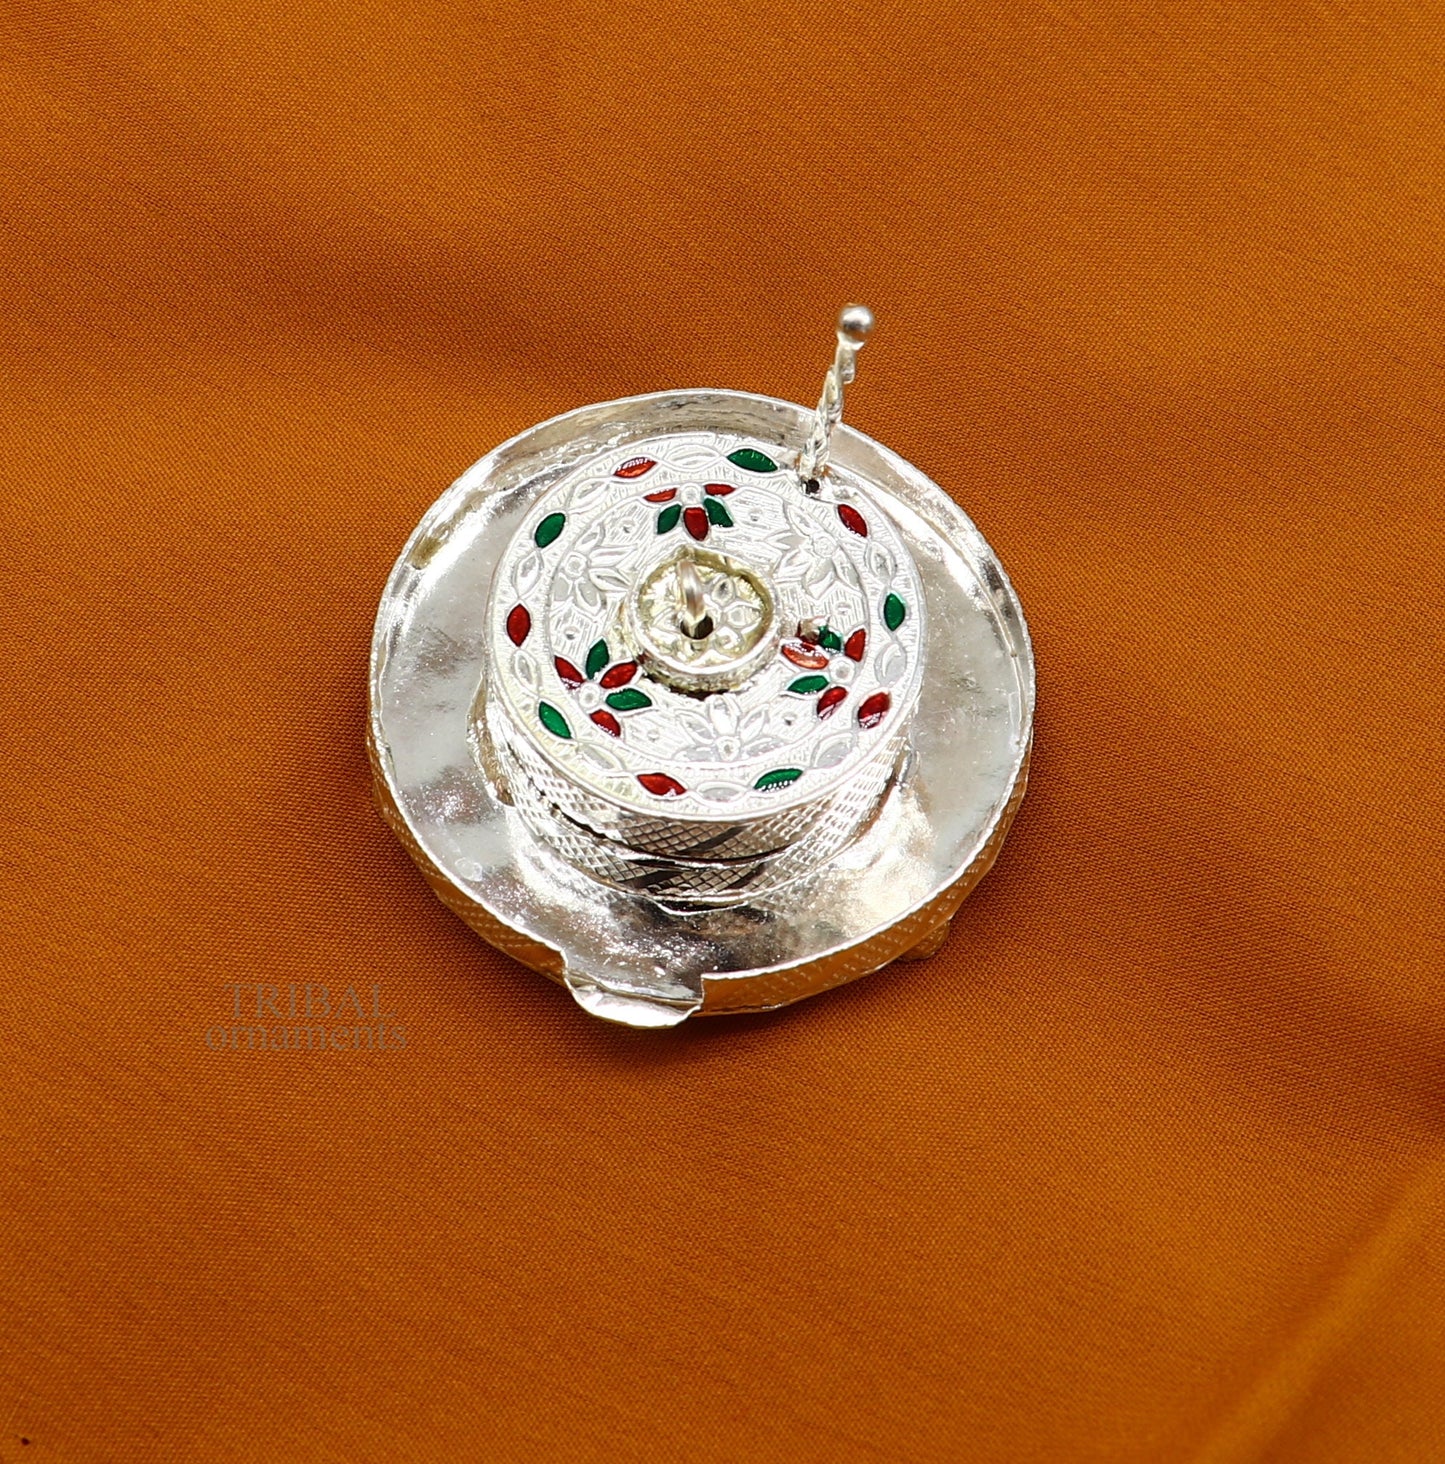 Vintage antique style handmade 925 sterling silver Small toy Atta chakki, flour mill unique hand driven article from india su707 - TRIBAL ORNAMENTS